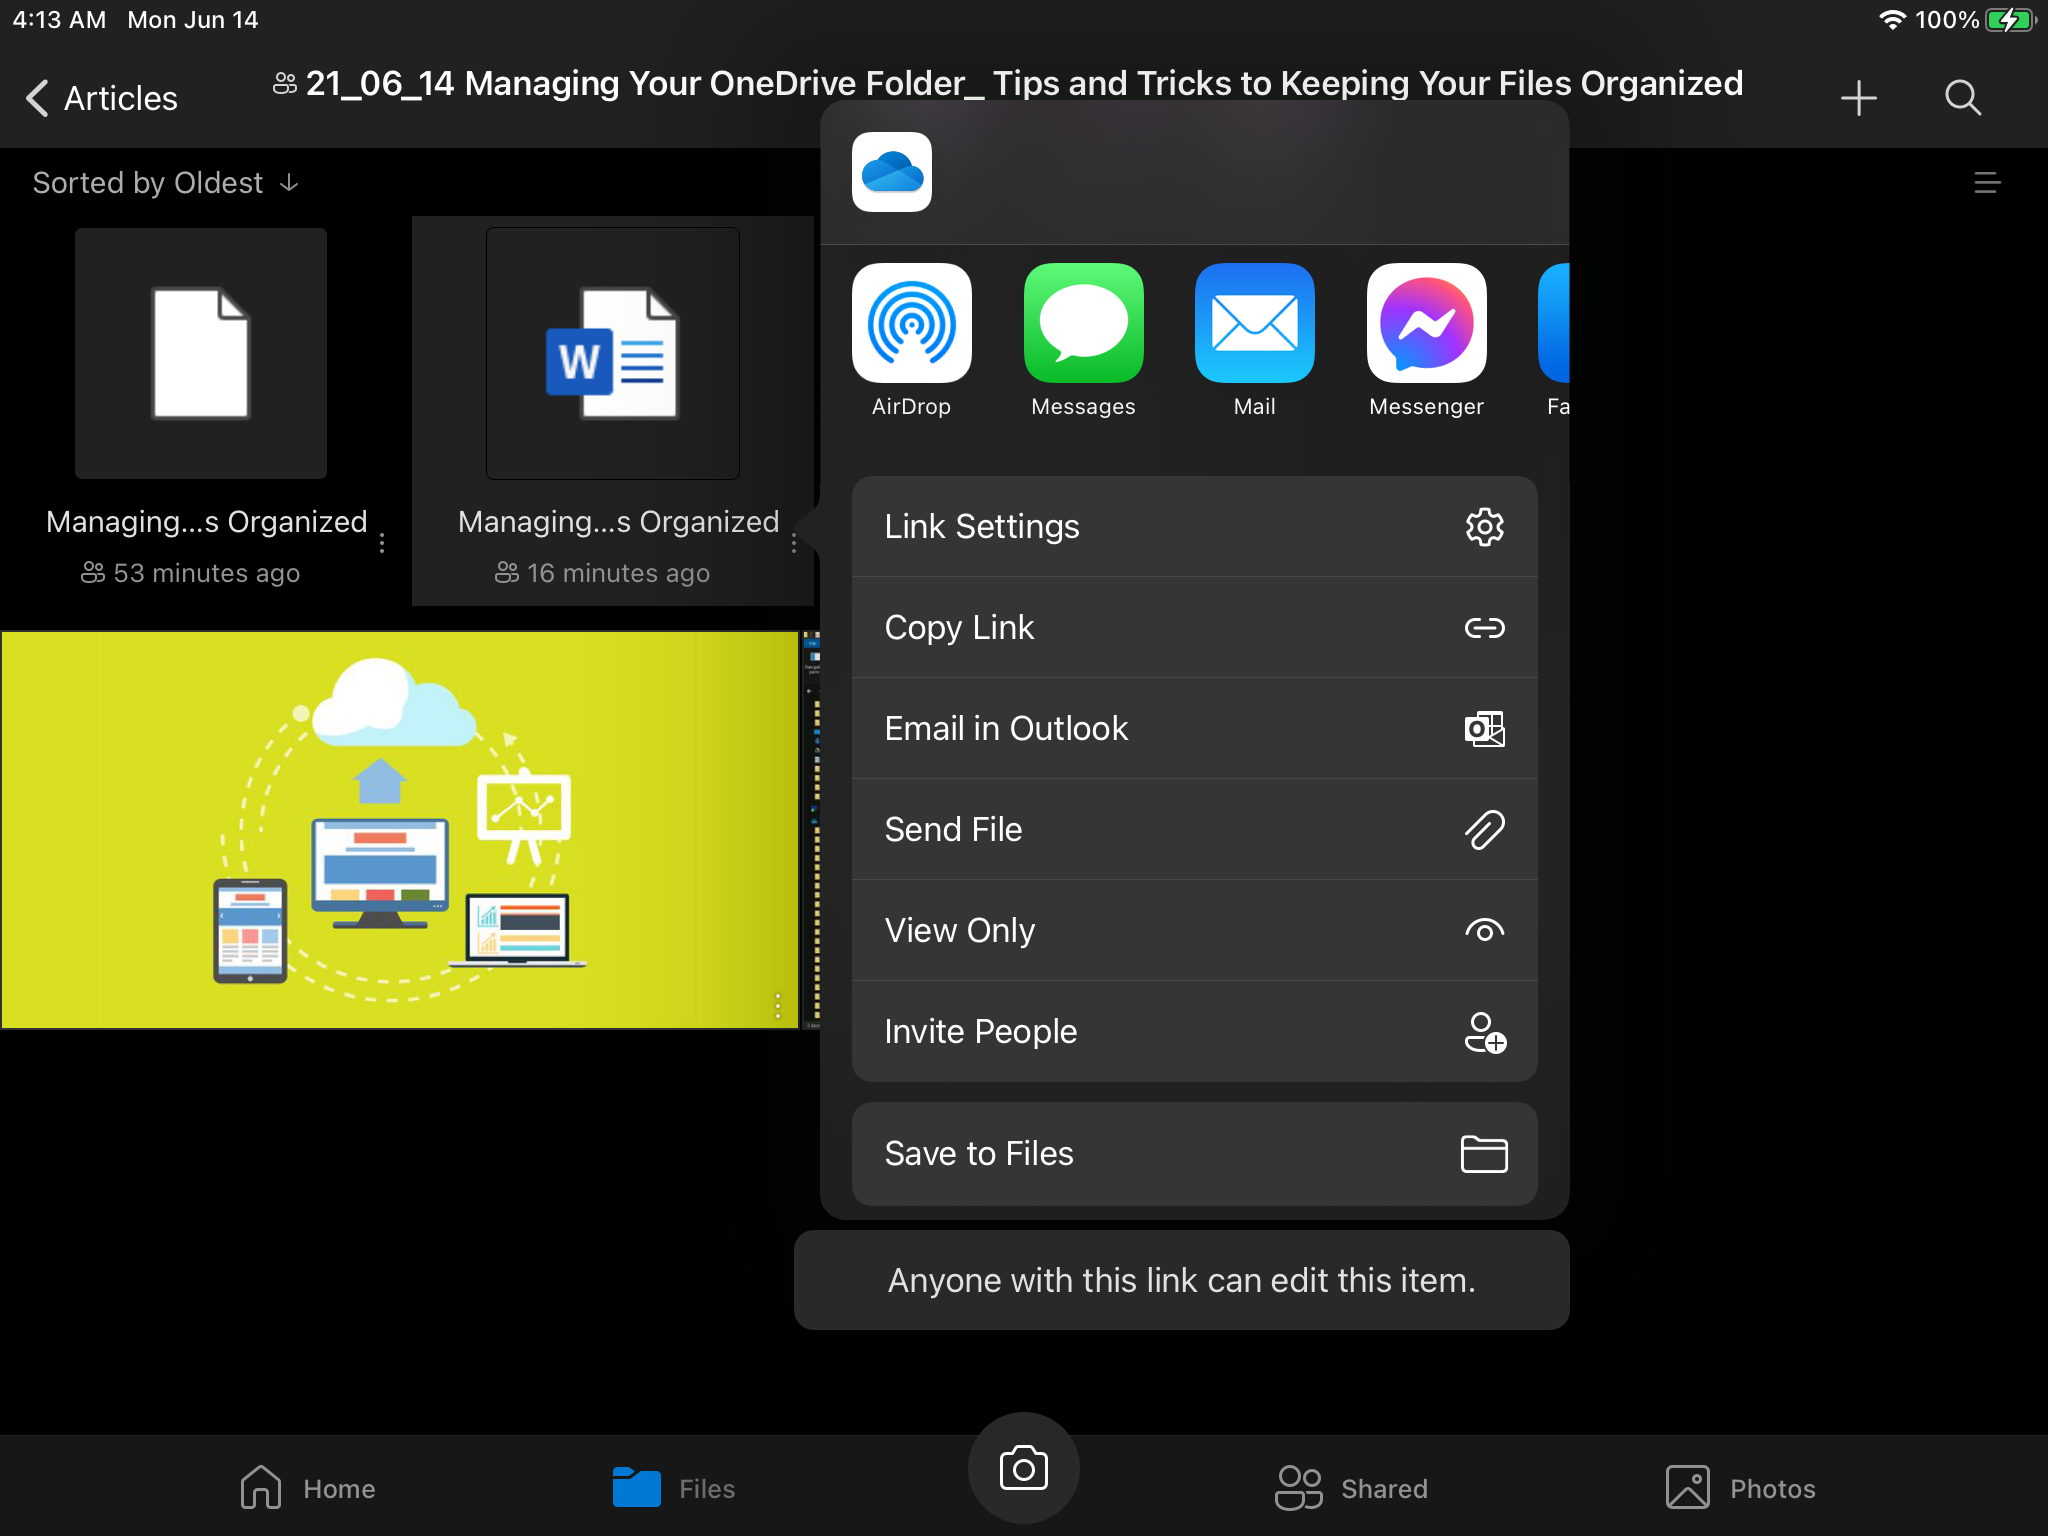 File sharing options on OneDrive in the Apple iPad